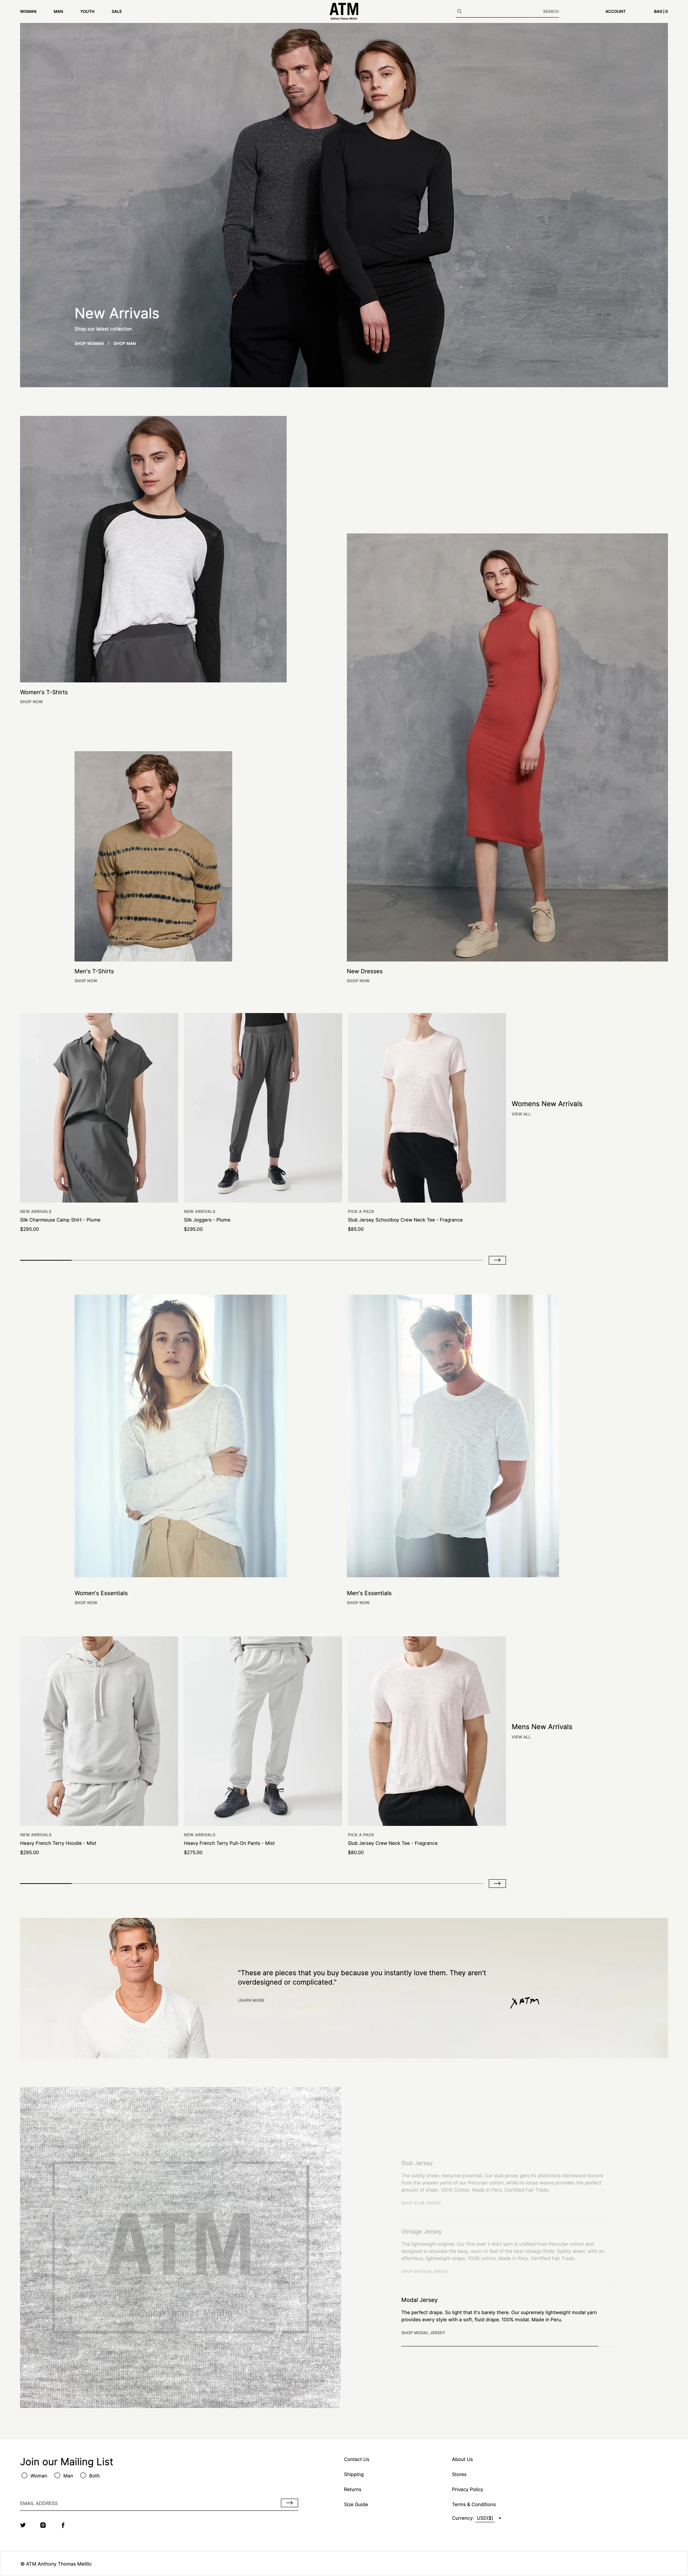 ATM Anthony Thomas Melillo Landing Page Example: ATM Anthony Thomas Melillo is a full lifestyle collection of luxurious sportswear for men and women.